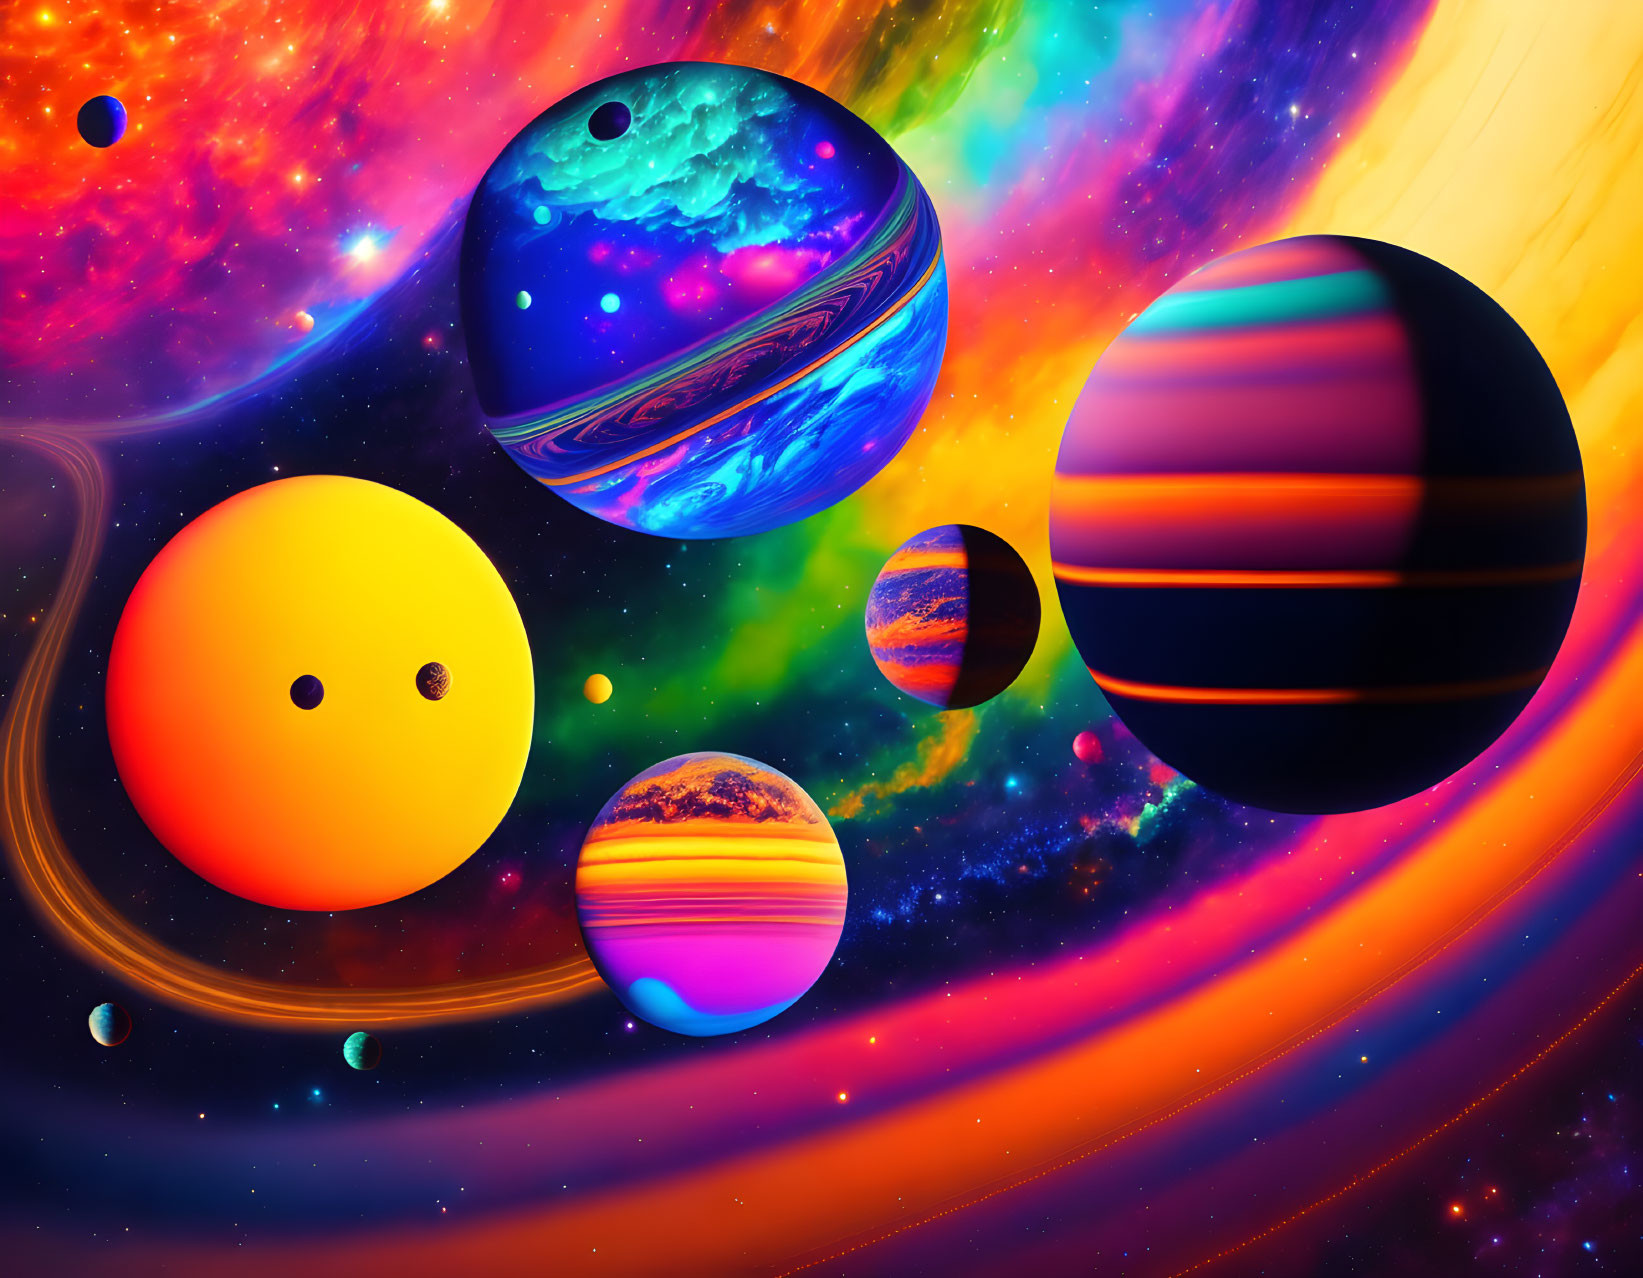 Colorful Surreal Planets and Moons in Cosmic Scene